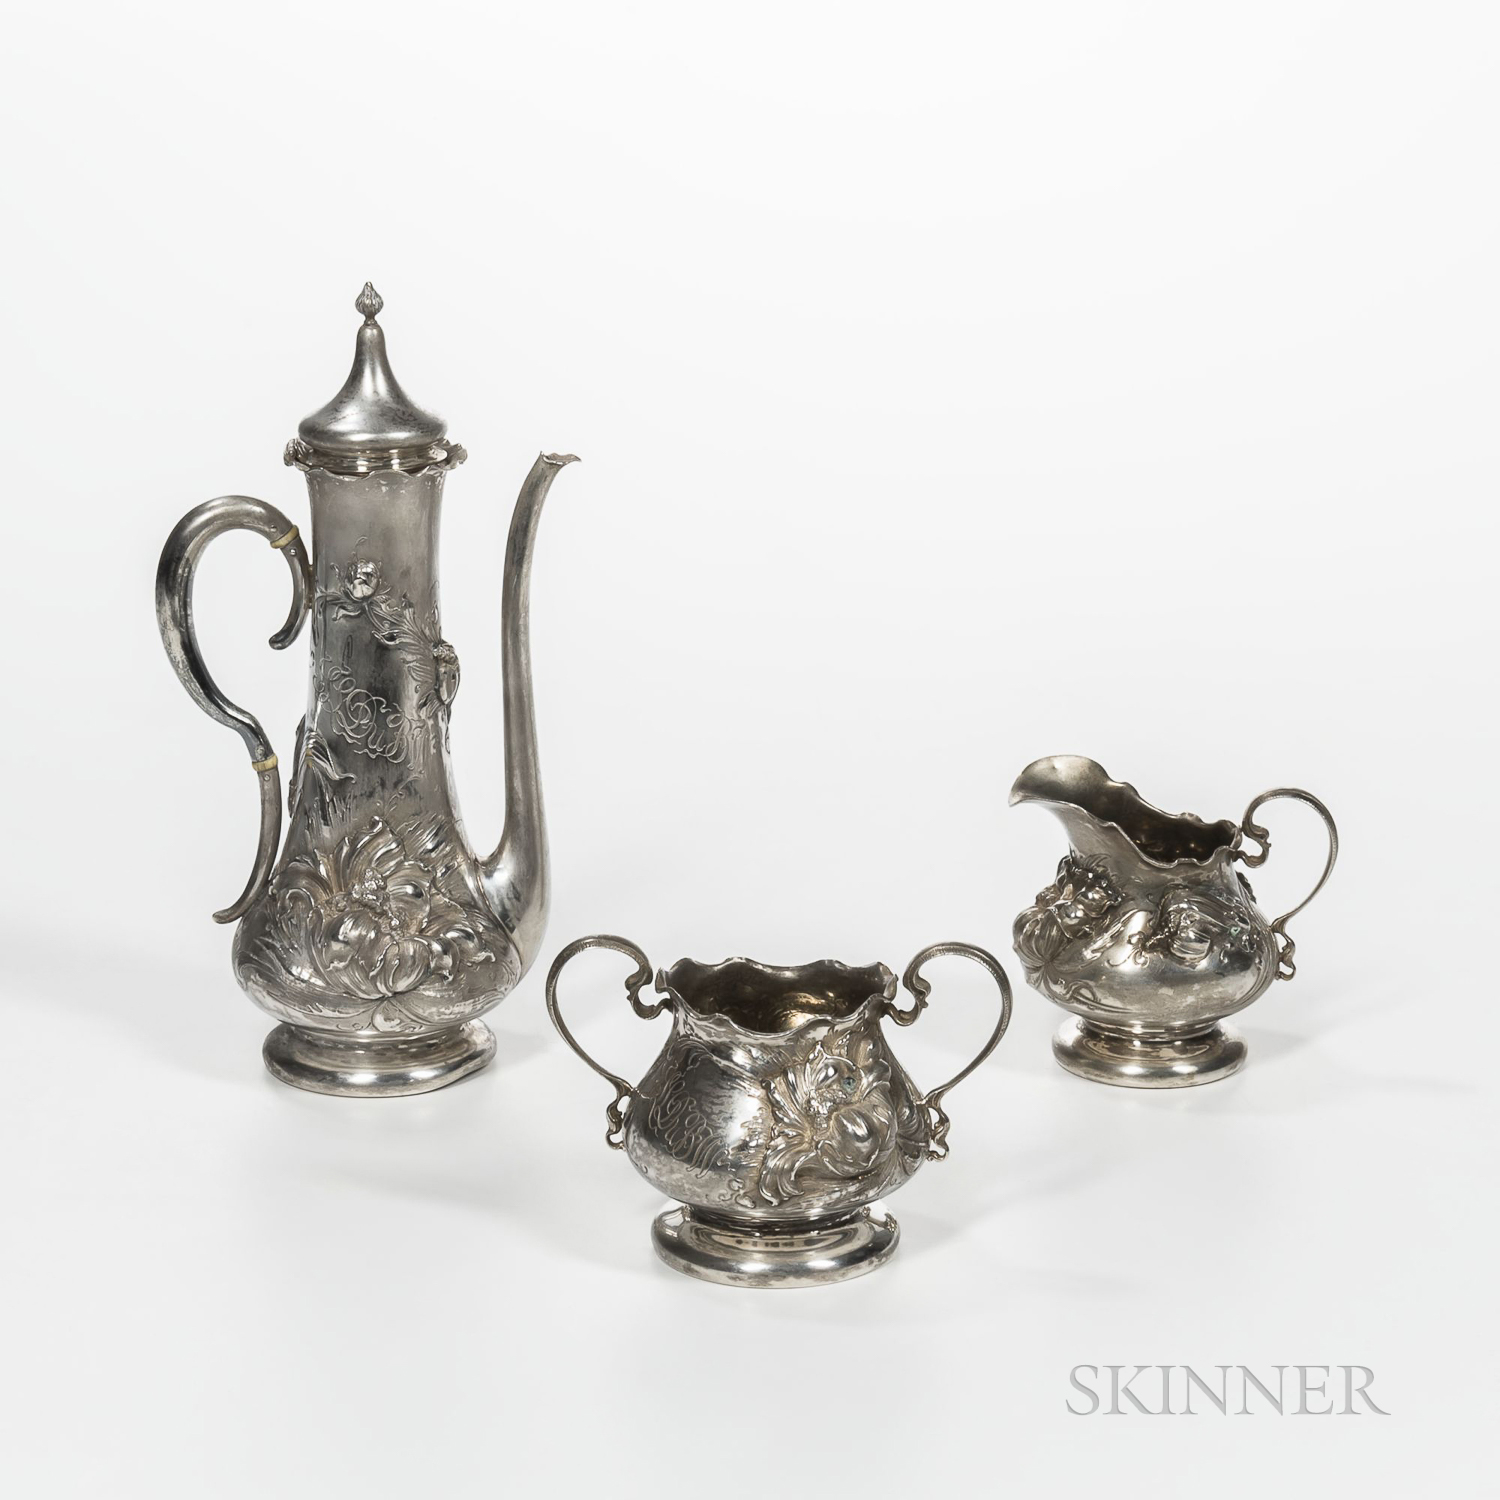 Three-piece George Shiebler Sterling Silver Coffee Service, New York, c. 1900, monogrammed, in the A